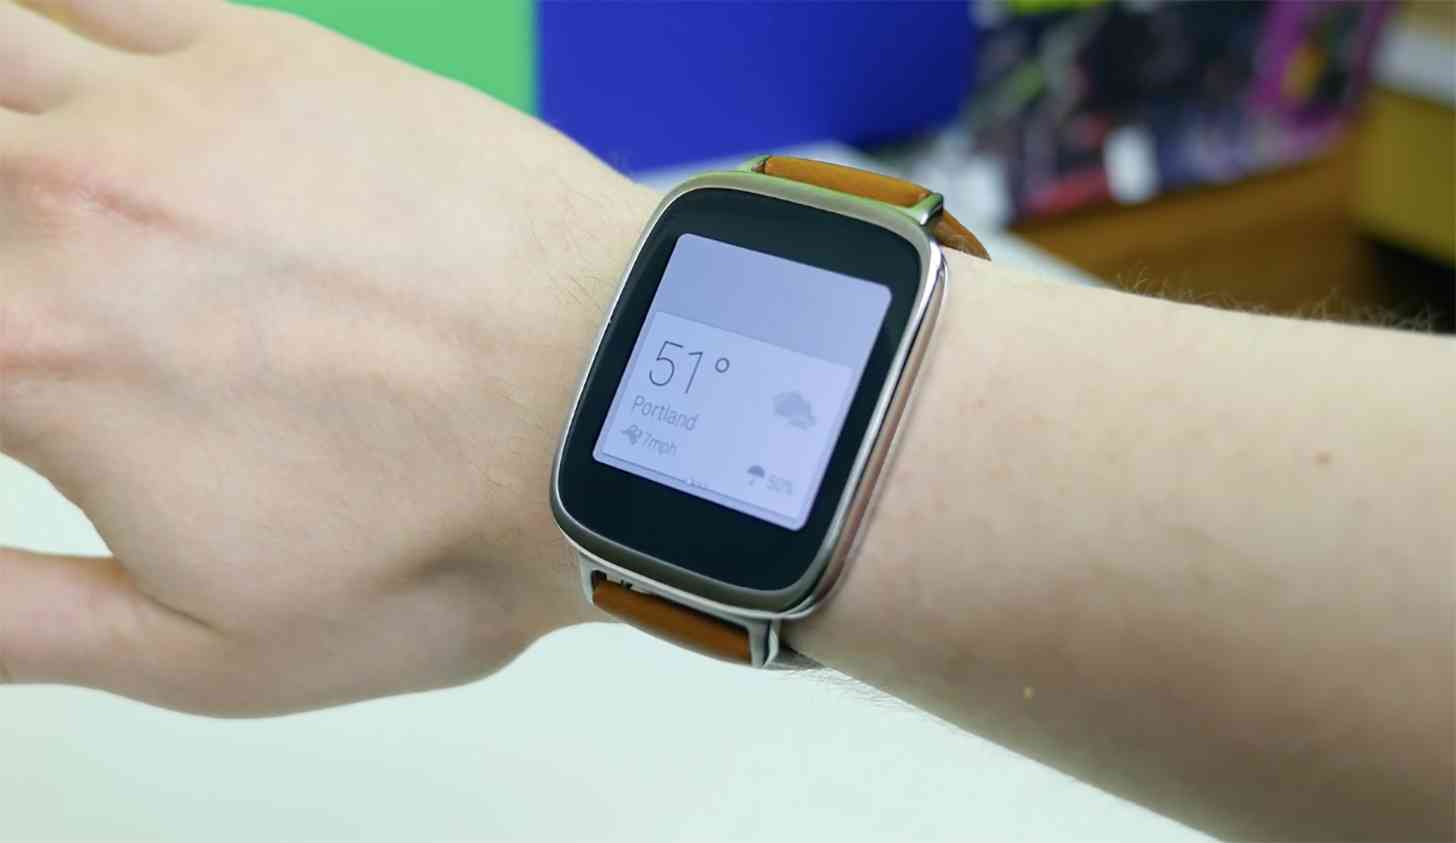 ASUS ZenWatch wrists on